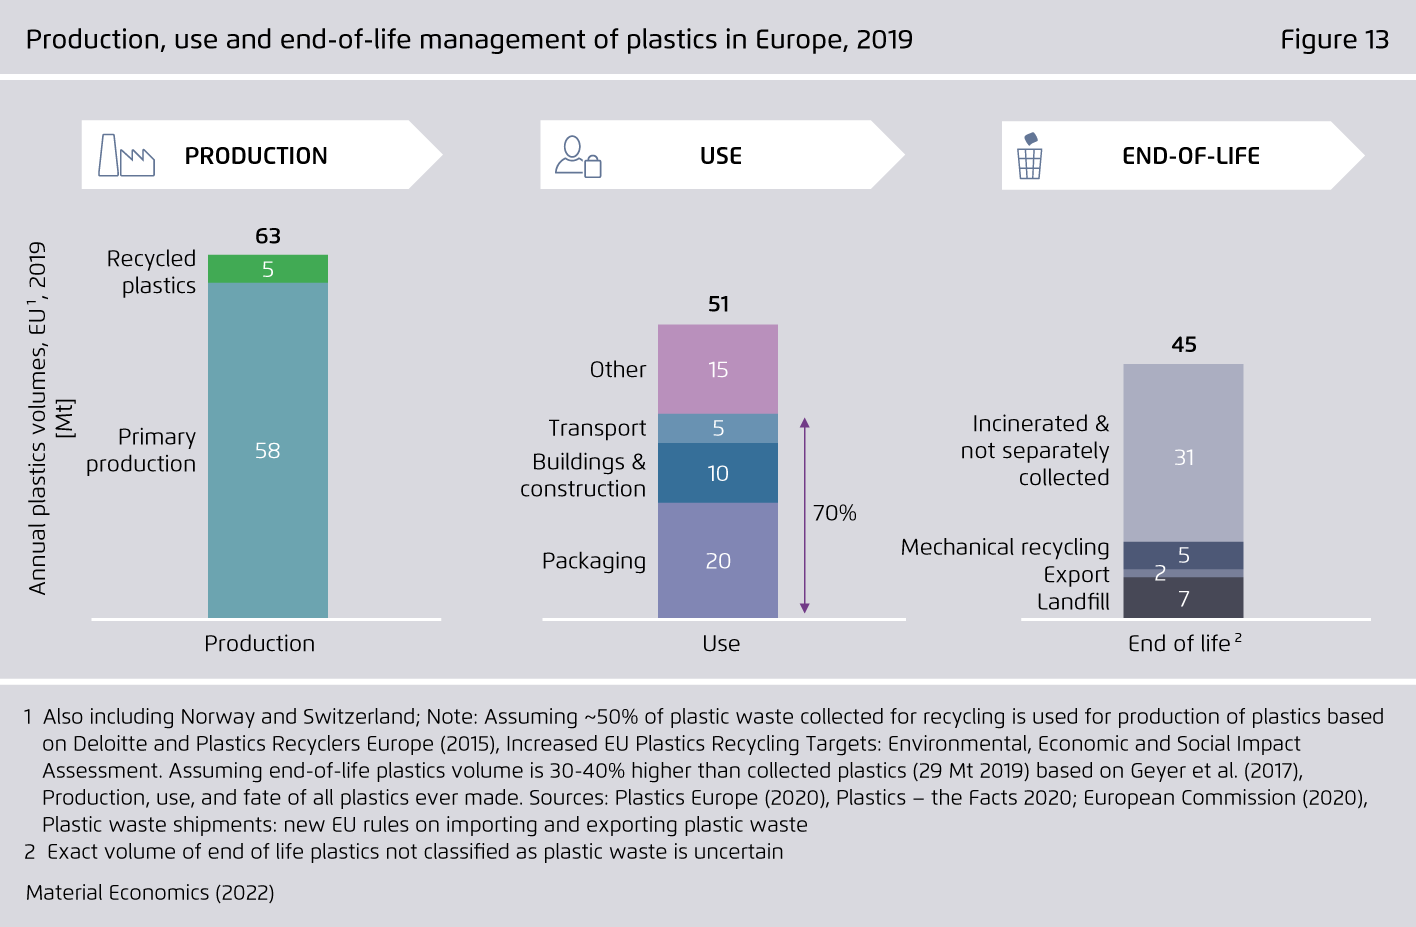 Preview for Production, use and end-of-life management of plastics in Europe, 2019